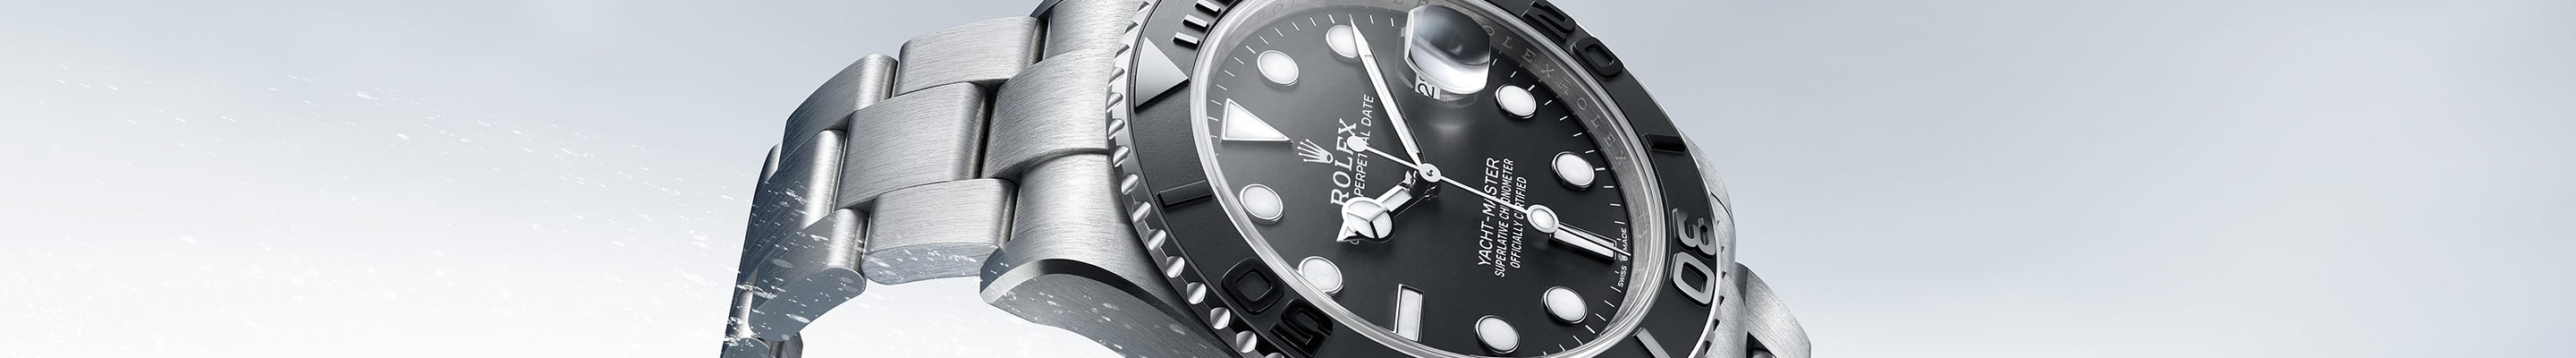 Rolex Yacht-Master 42 in RLX Titanium - m226627-0001 at Kee Hing Hung